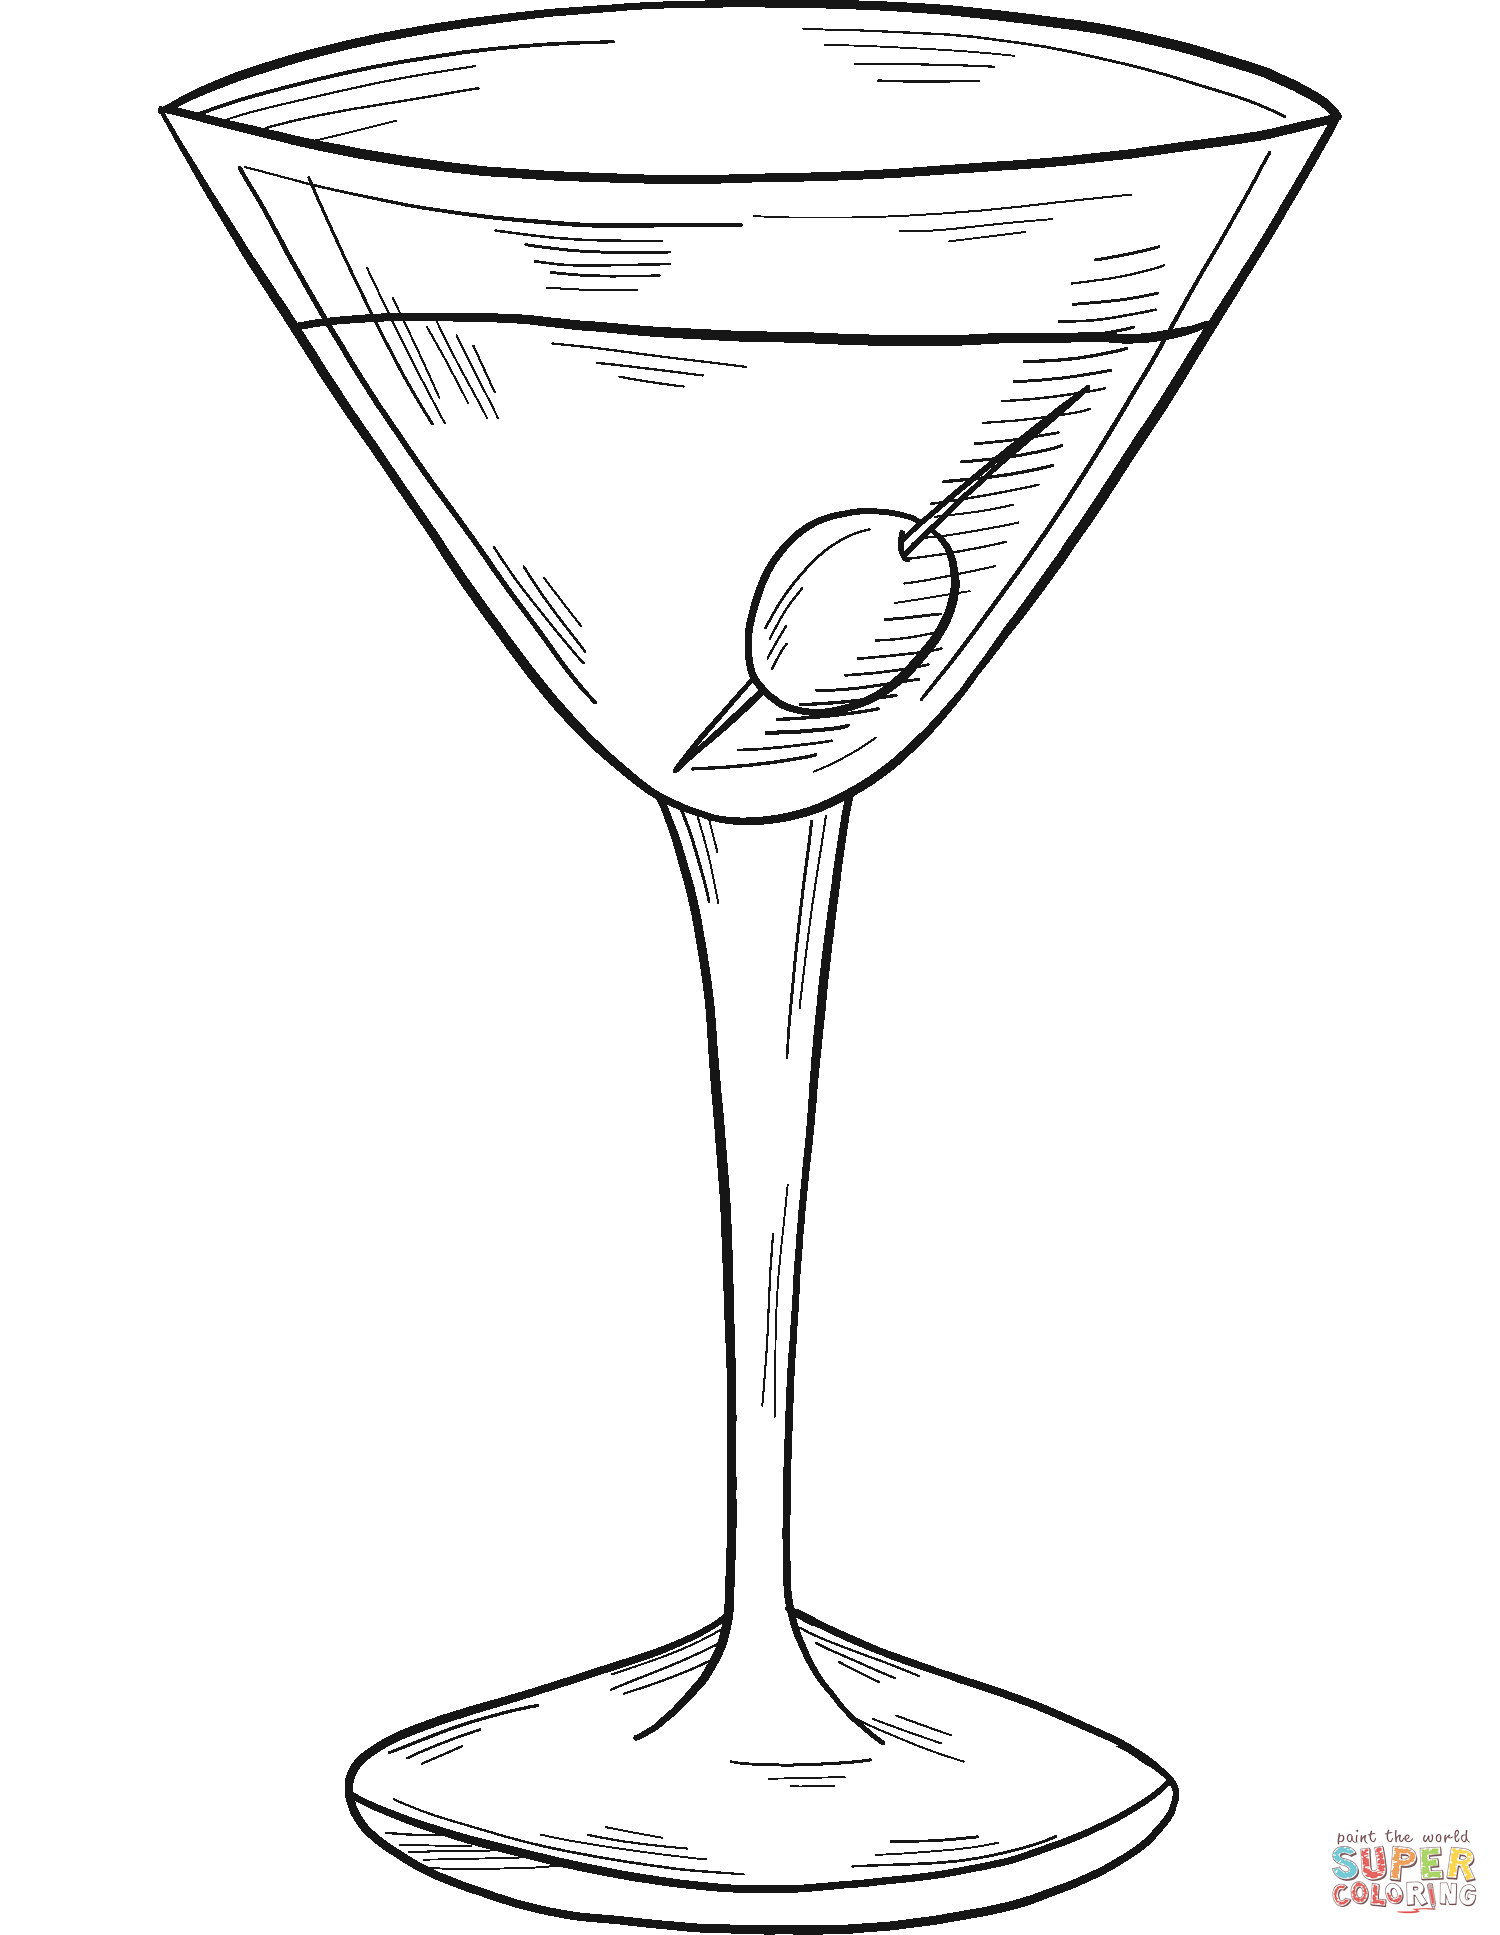 Martini Glass coloring page | Free Printable Coloring Pages